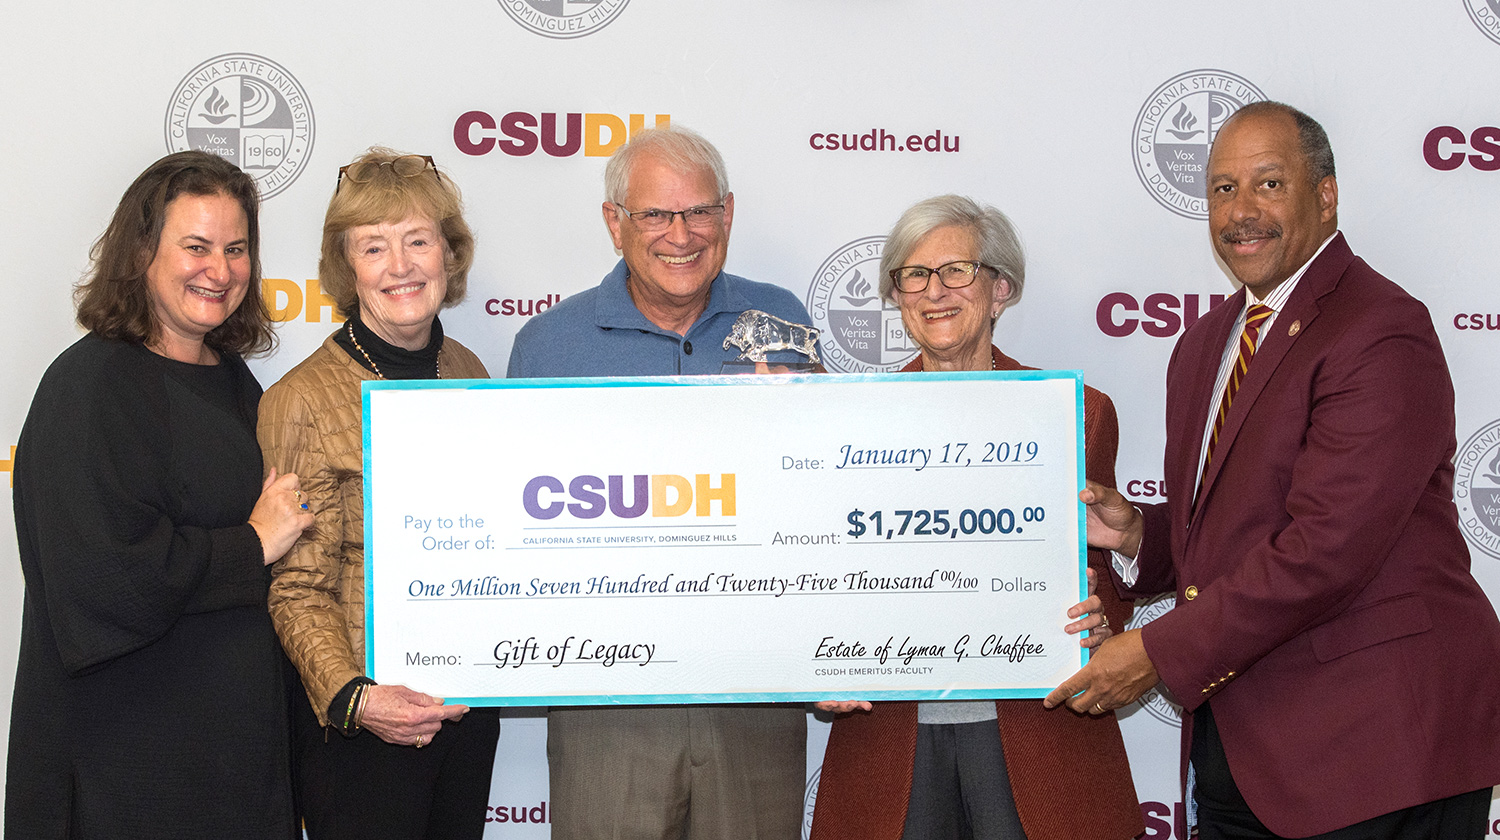 (from left): University Art Gallery Director Aandrea Stang, Marilyn Chaffee, Lyman Chaffee’s siblings David Chaffee (Marilyn's husband) and Marta Stang, and CSUDH President Thomas A. Parham.